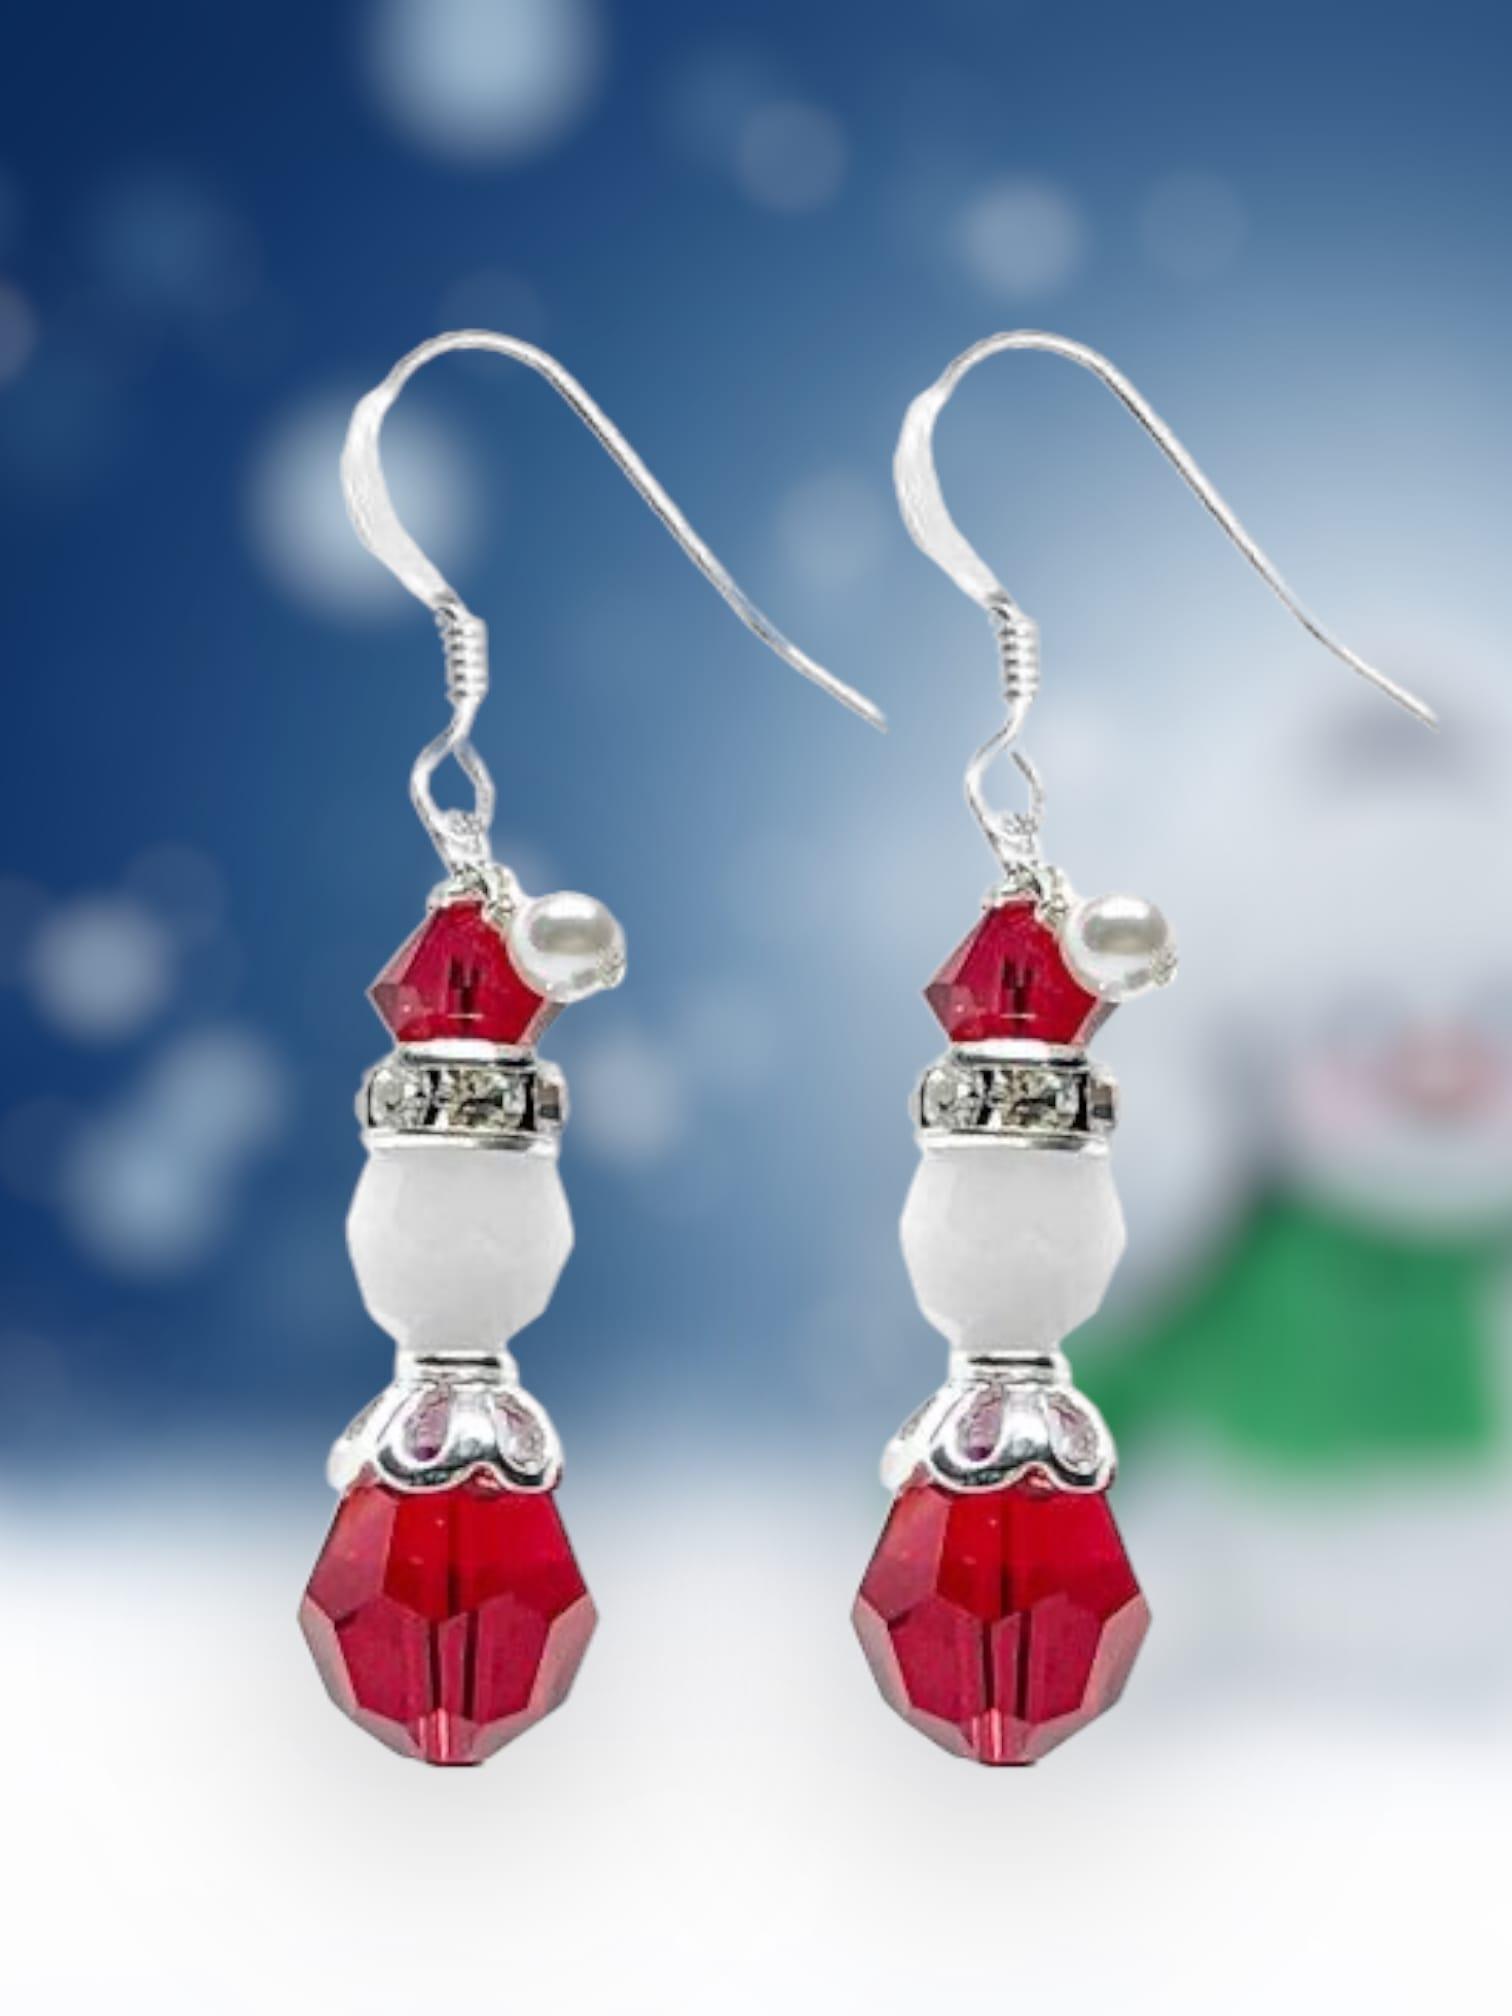 Mrs Claus Christmas Earring Kit  is